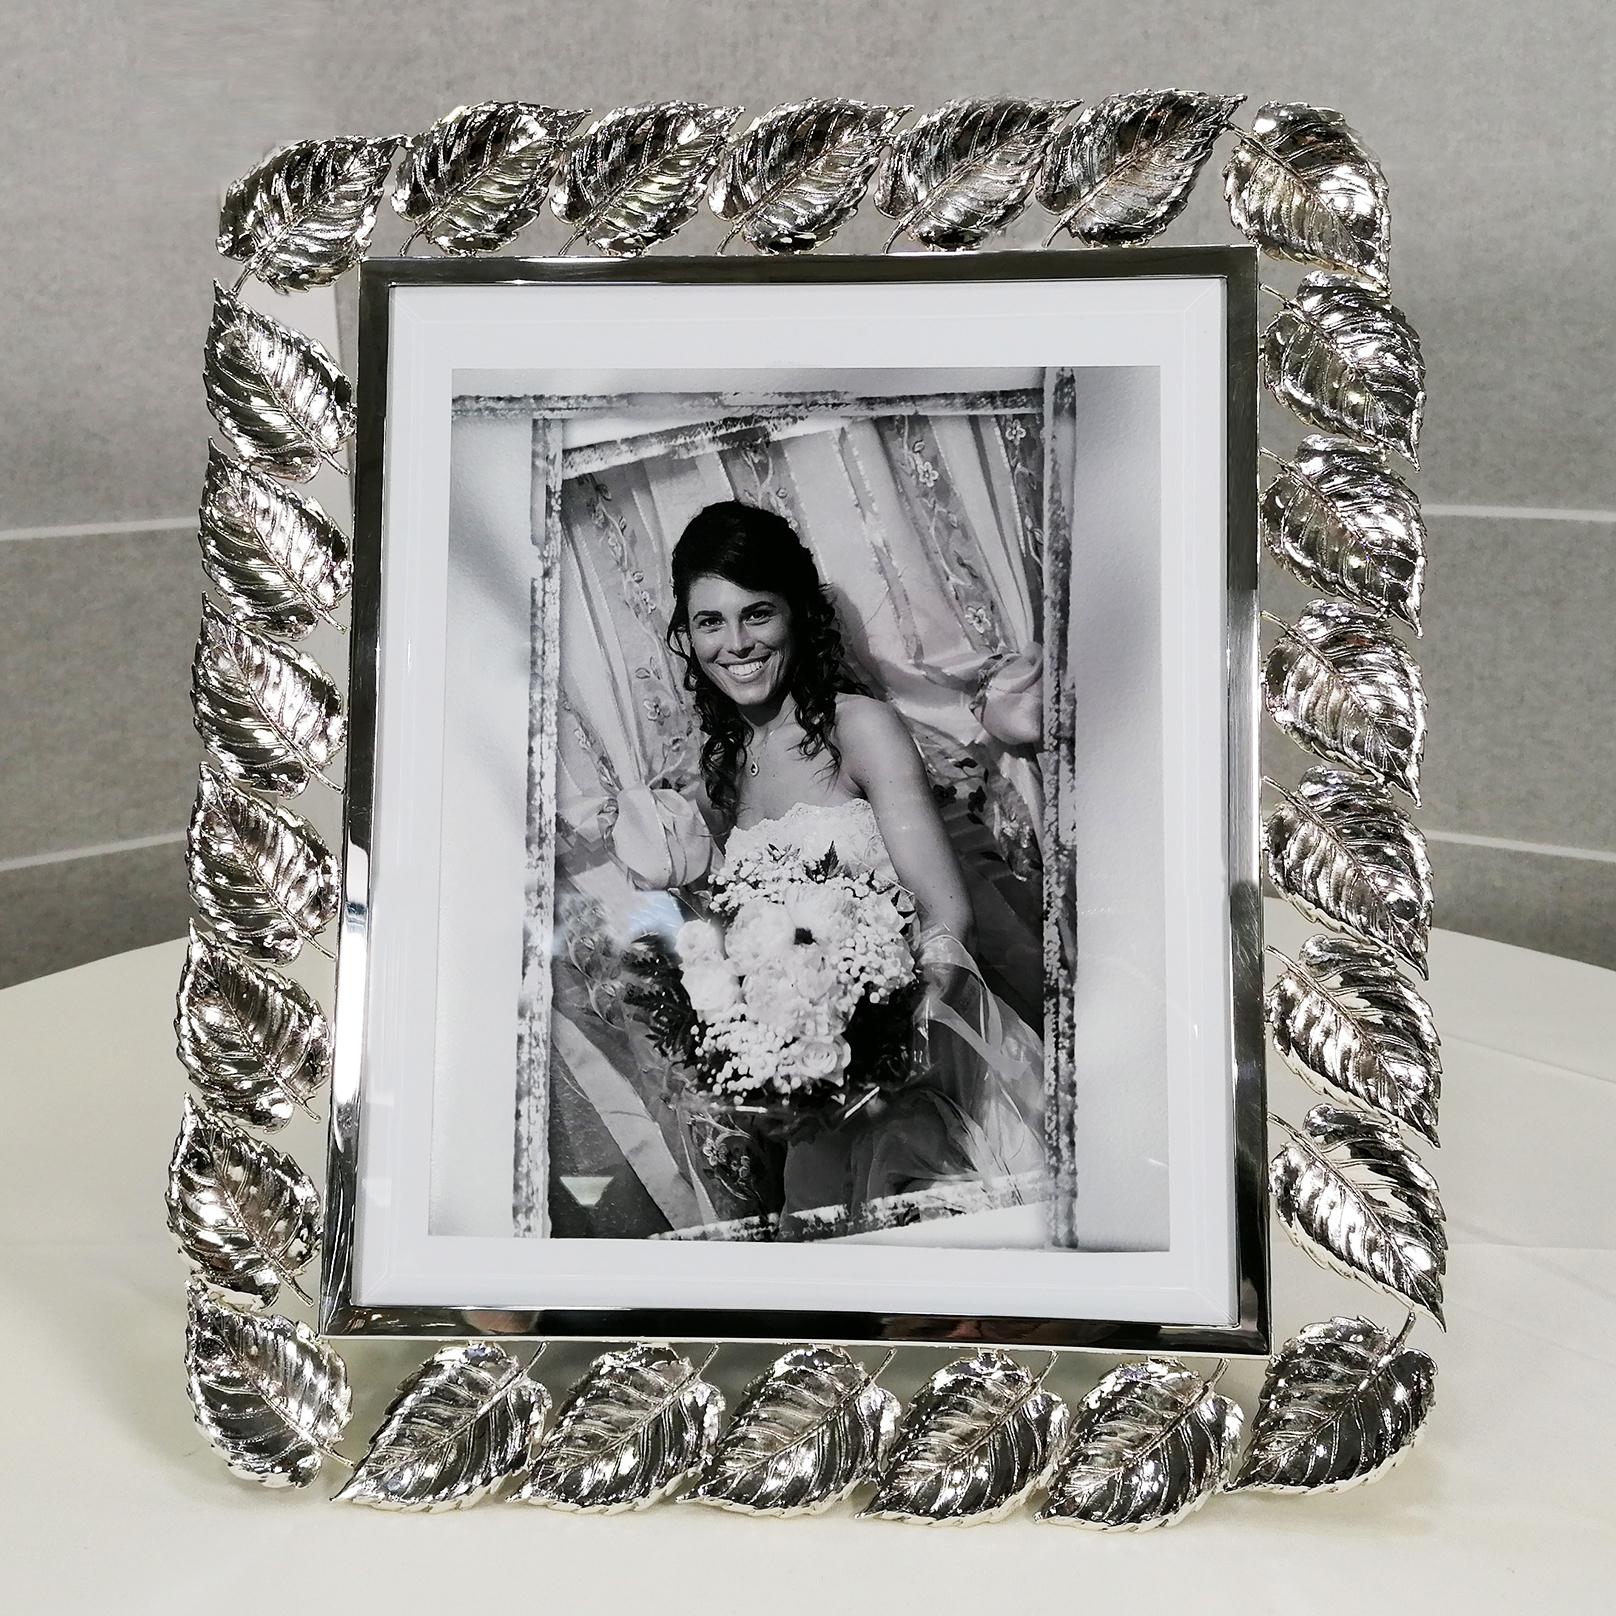 Solid silver photo frame.
The frame is made of a shiny rectangular silver plate where chiseled silver plate leaves have been welded onto the entire surface. The back was done in blue velvet.
The rectangular glass has been embellished with